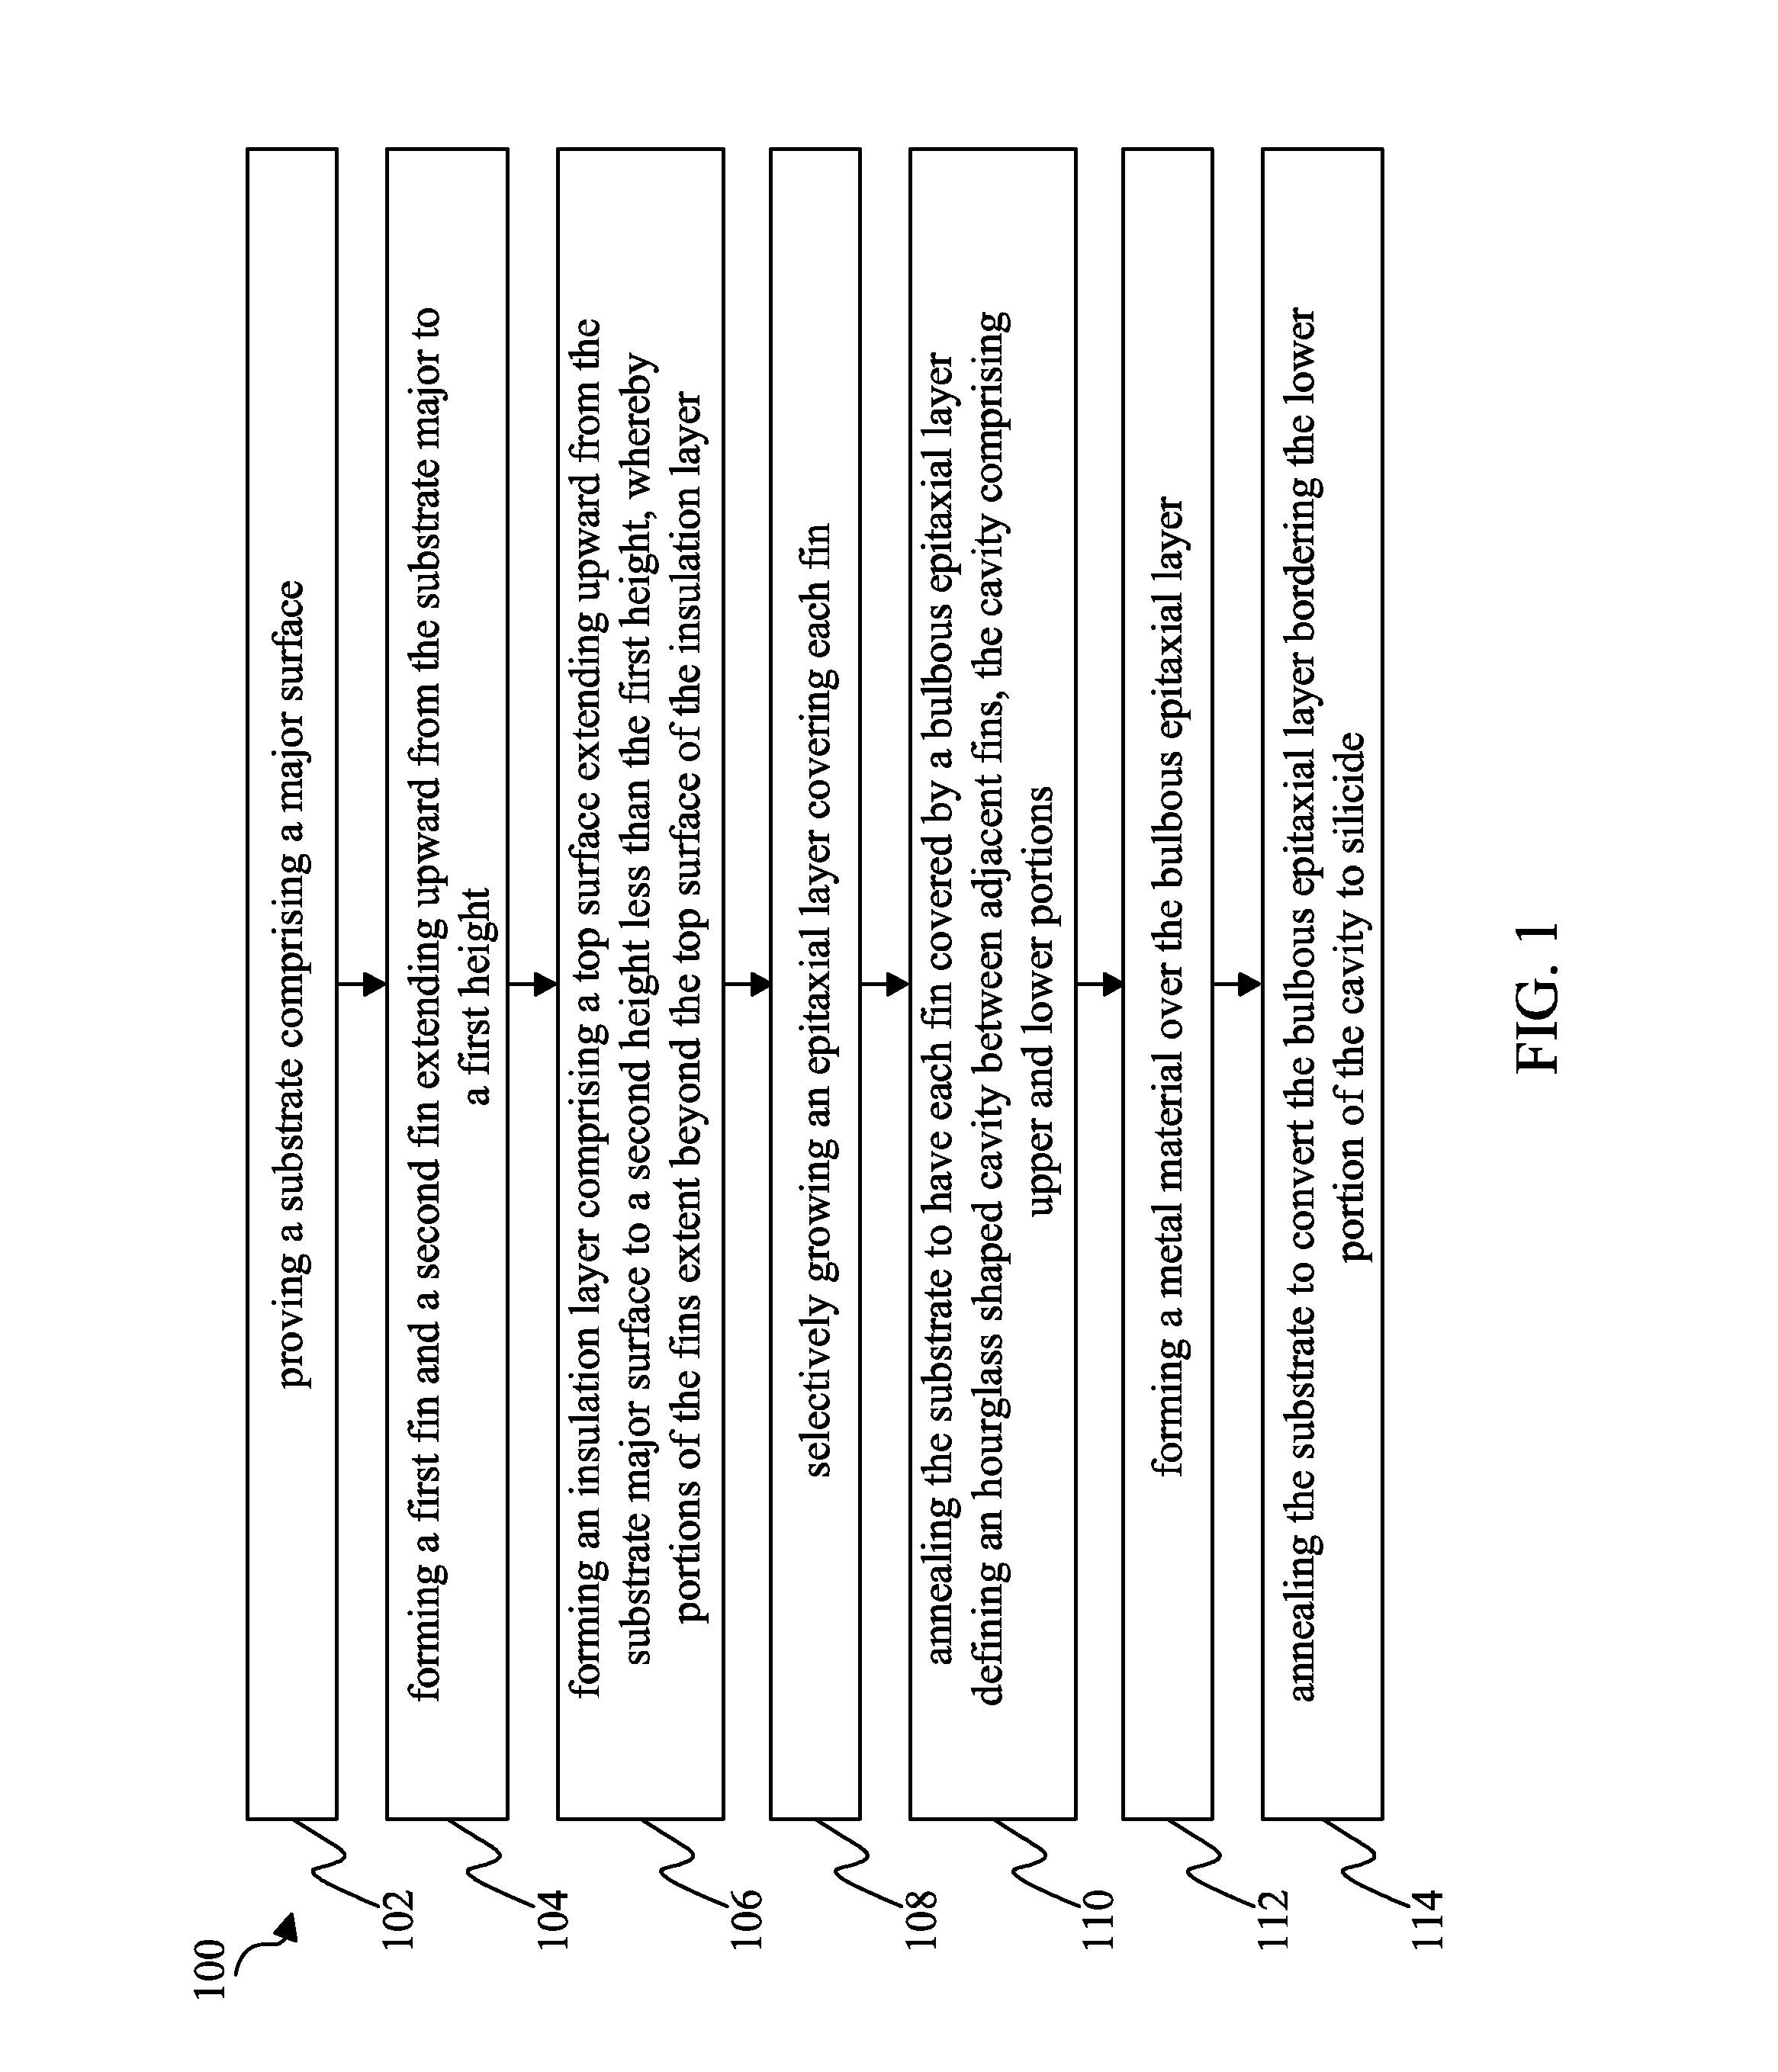 Finfet and method of fabricating the same